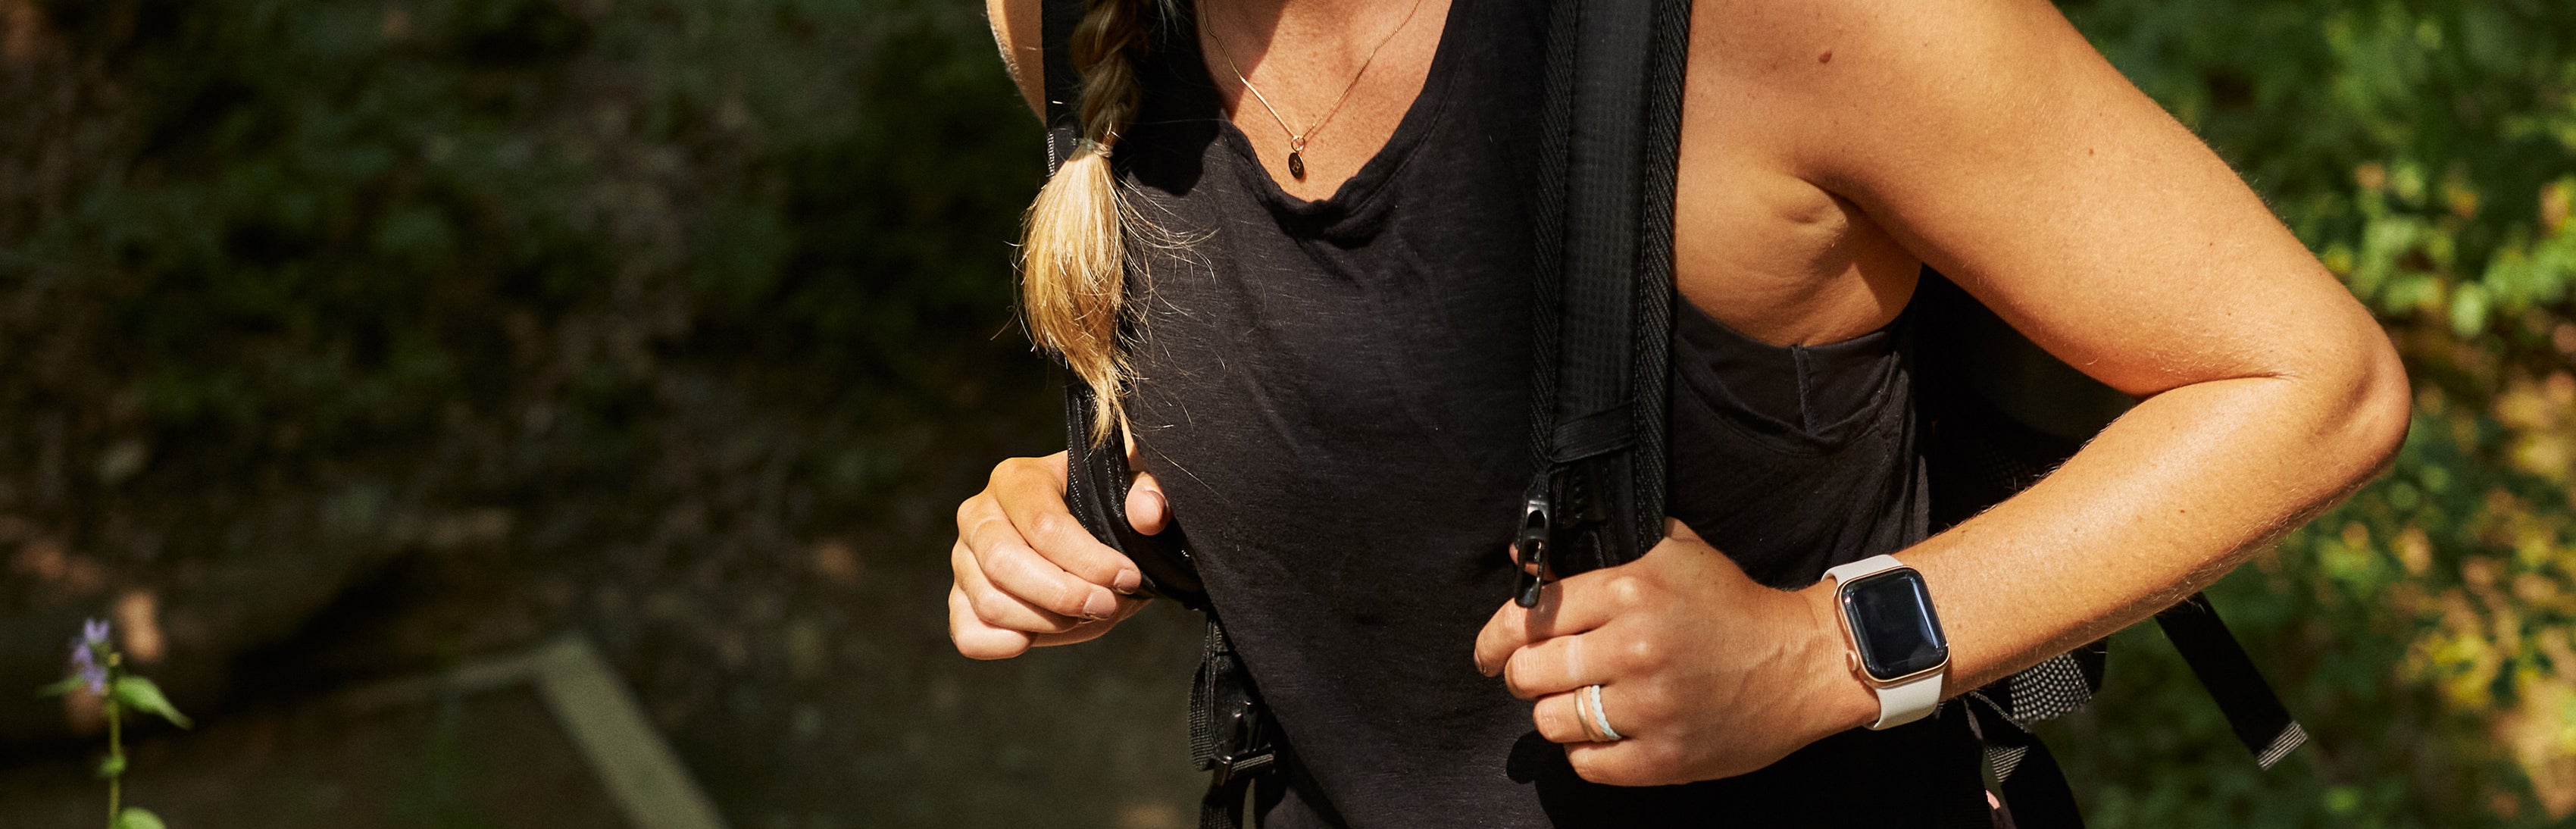 woman hiking wearing a Groove Life watch band